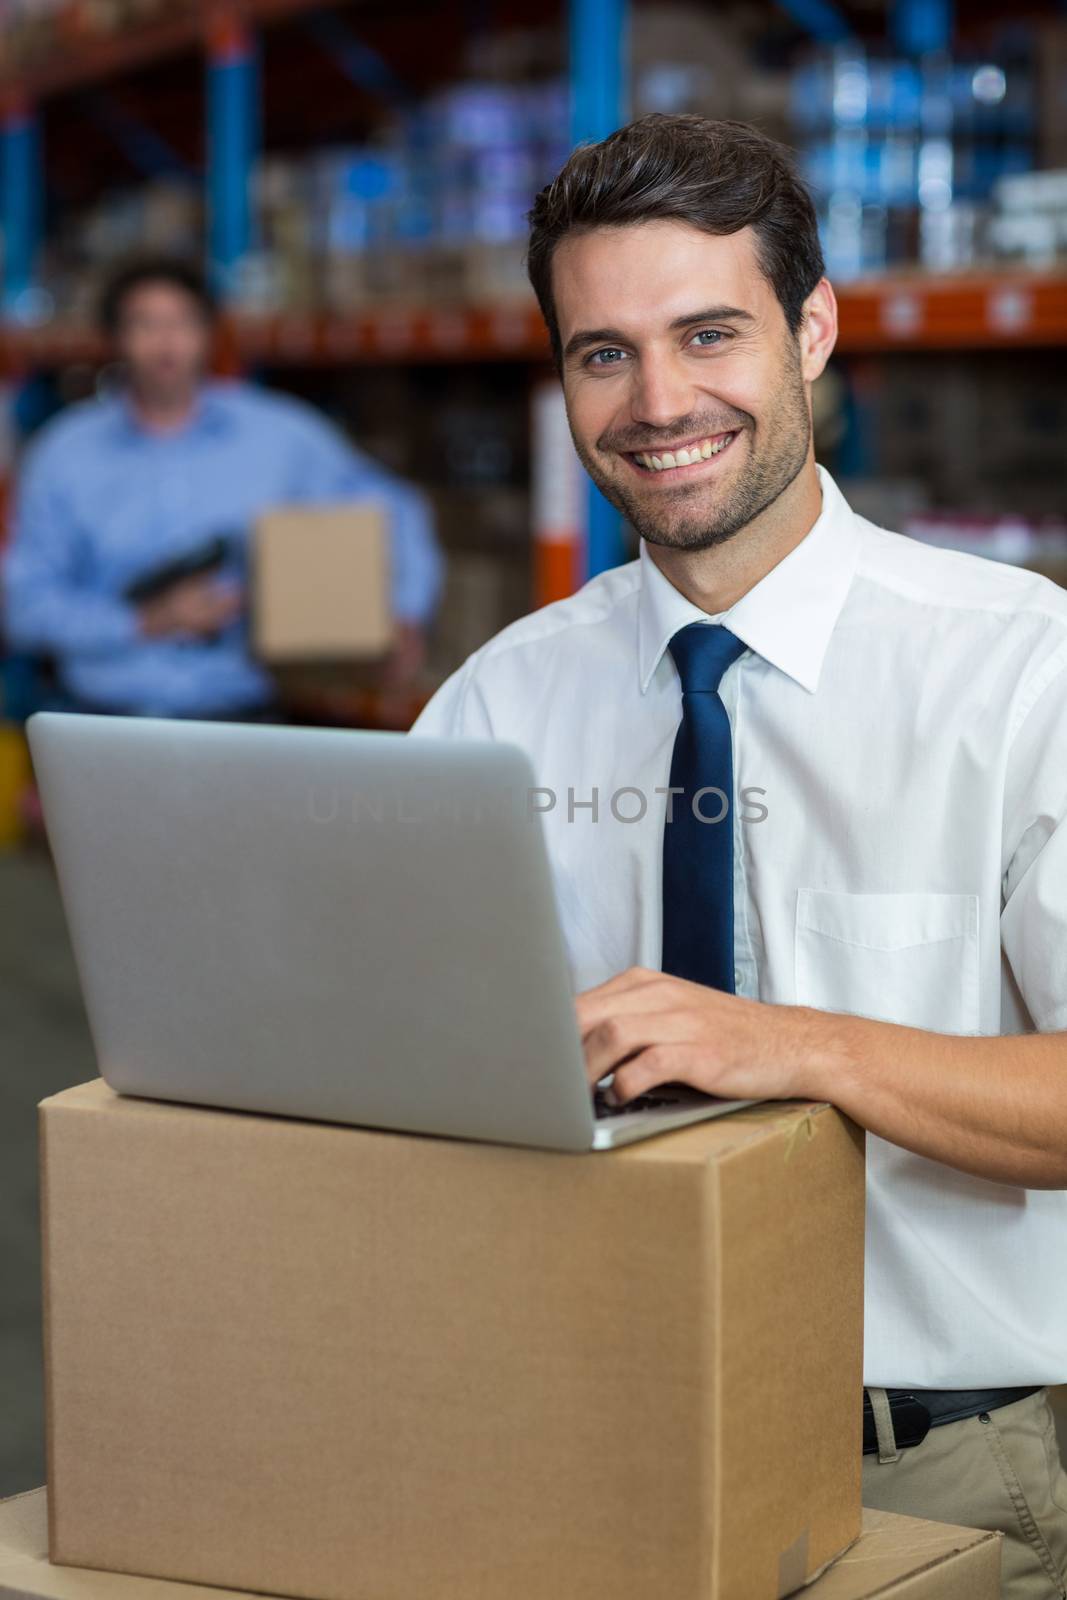 Portrait of happy manager using a laptop put on cardboard in a warehouse